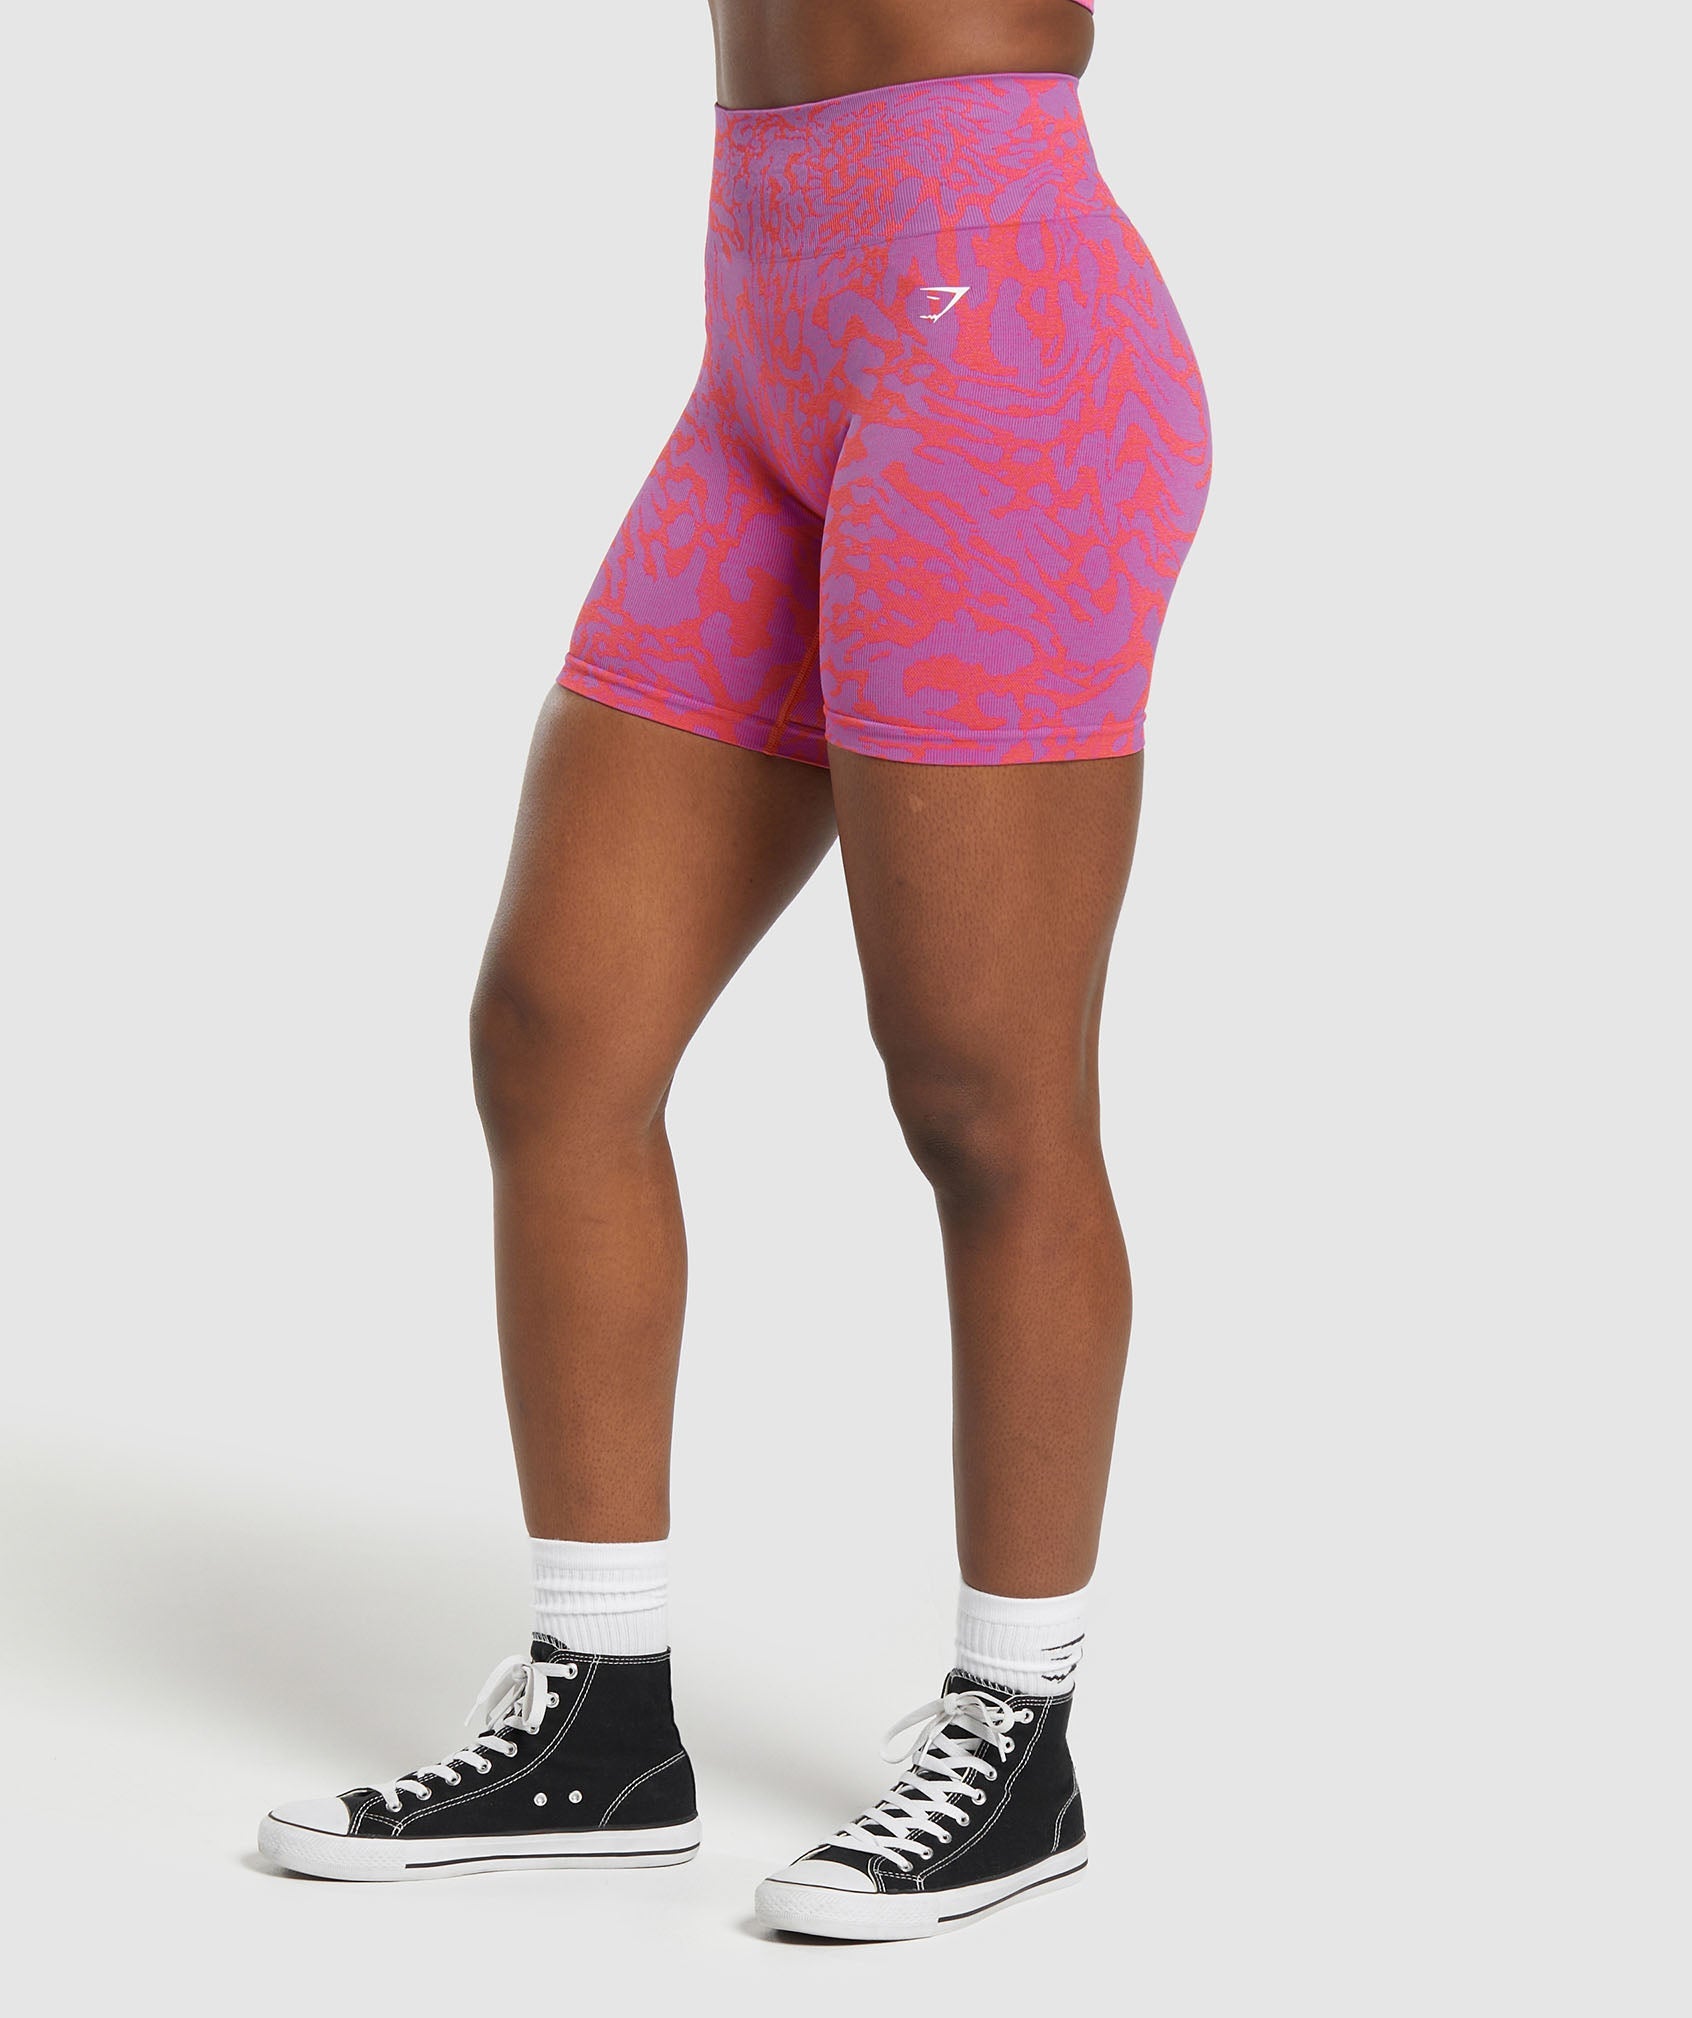 Adapt Safari Tight Shorts in Shelly Pink/Fly Coral - view 3